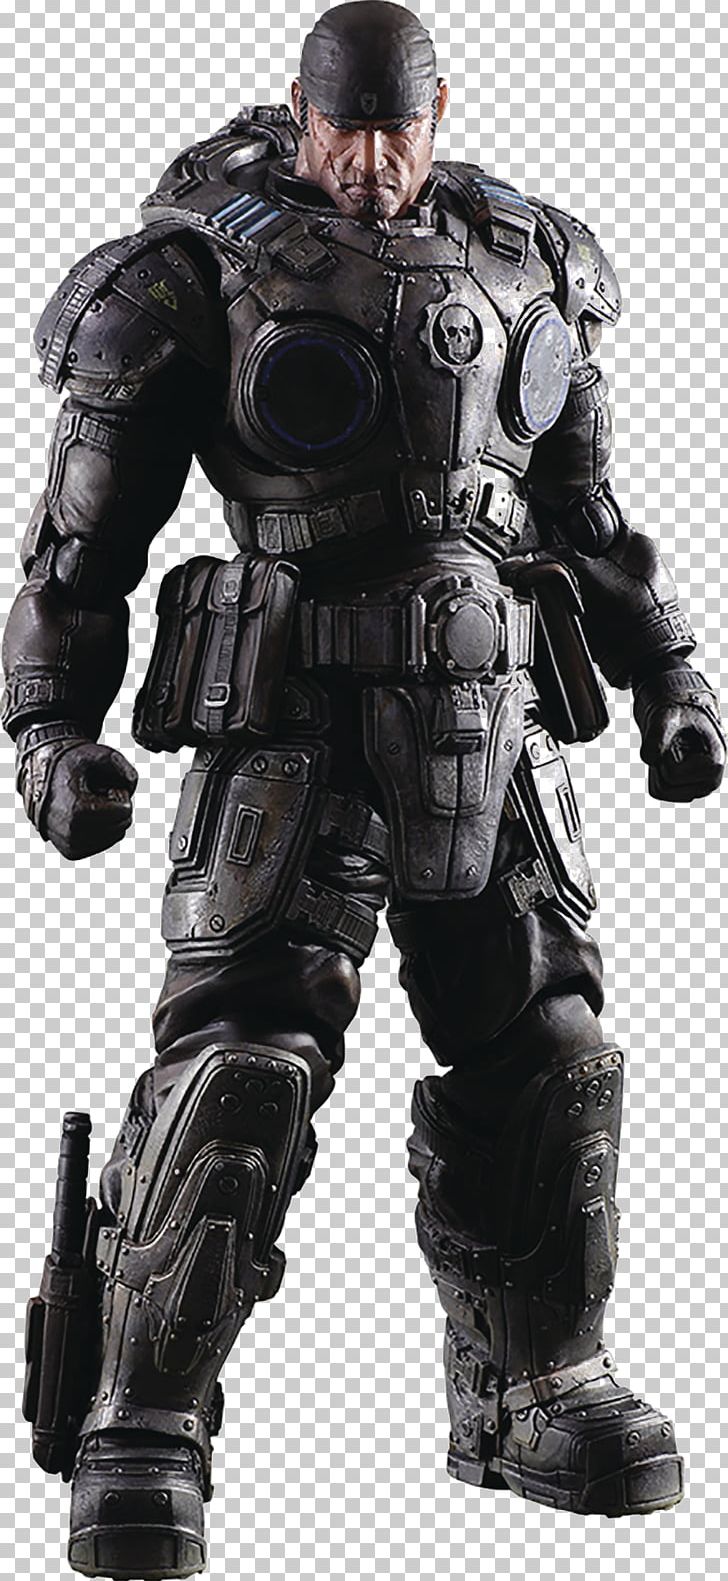 Gears Of War Marcus Fenix Play Arts Kai Action Figure Gears Of War Marcus Fenix Play Arts Kai Action Figure Action & Toy Figures Video Games PNG, Clipart, Action Fiction, Action Figure, Action Toy Figures, Armour, Epic Games Free PNG Download